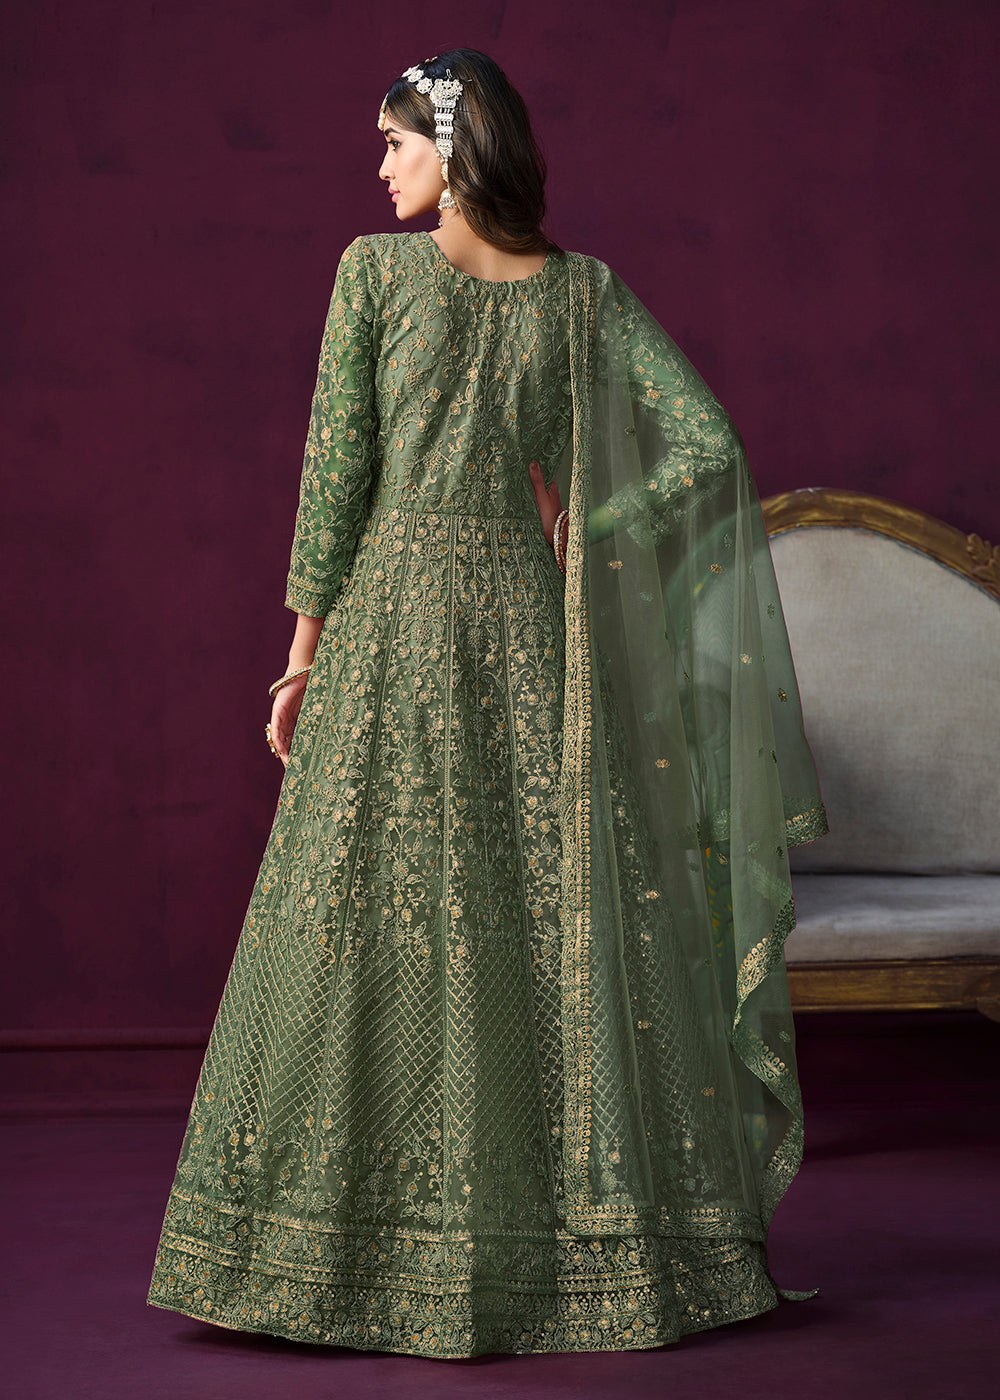 Buy Now Charming Green Embroidered Net Floor Length Anarkali Suit Online in USA, UK, Australia, New Zealand, Canada & Worldwide at Empress Clothing.